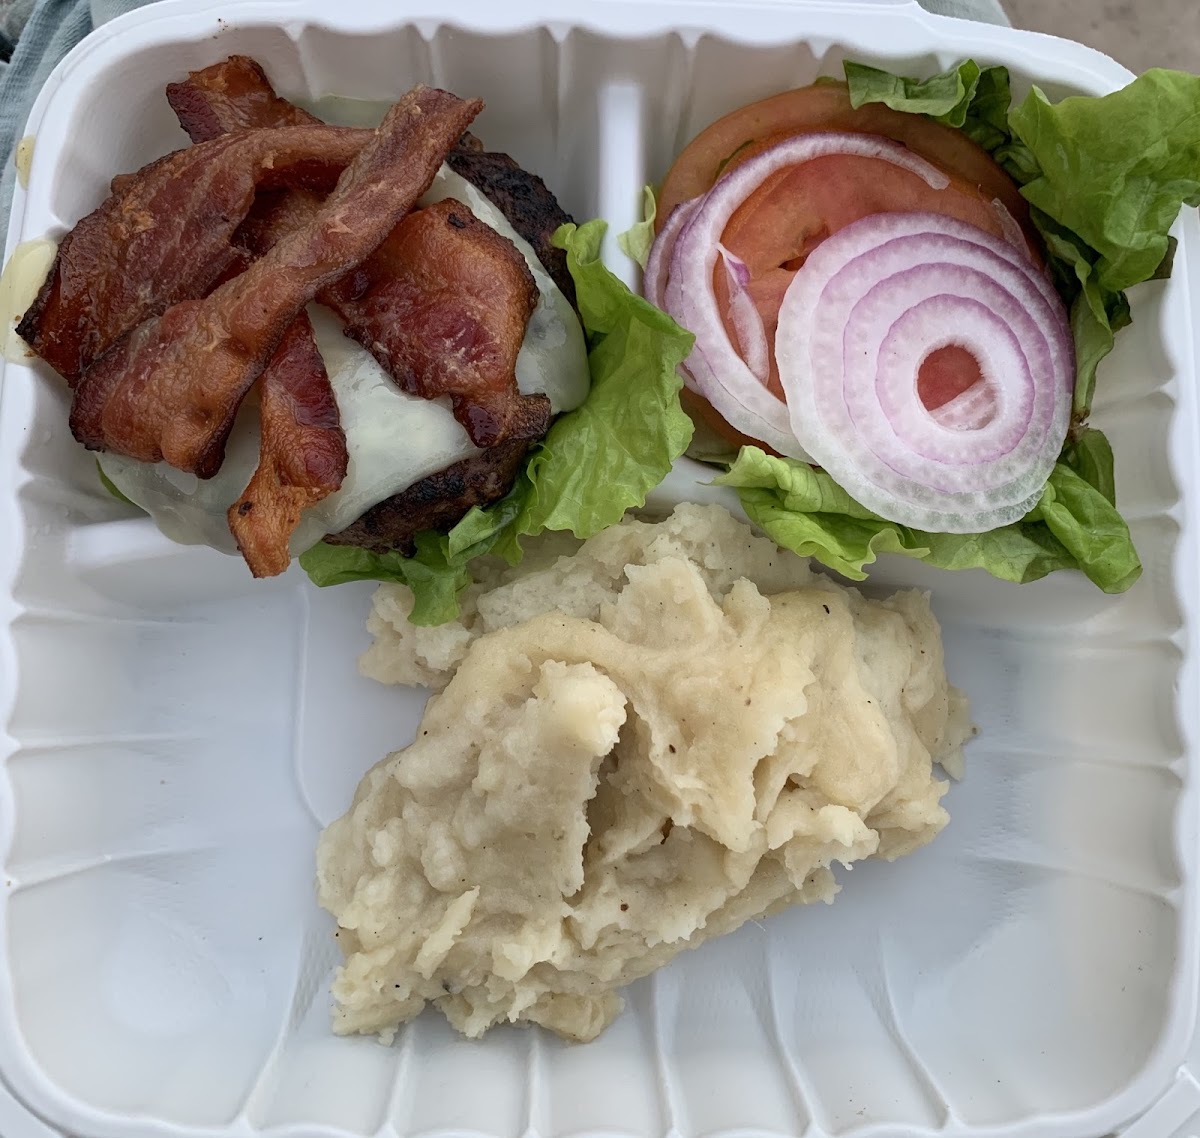 Bacon Burger with mashed potatoes! So delicious! Good quality food.